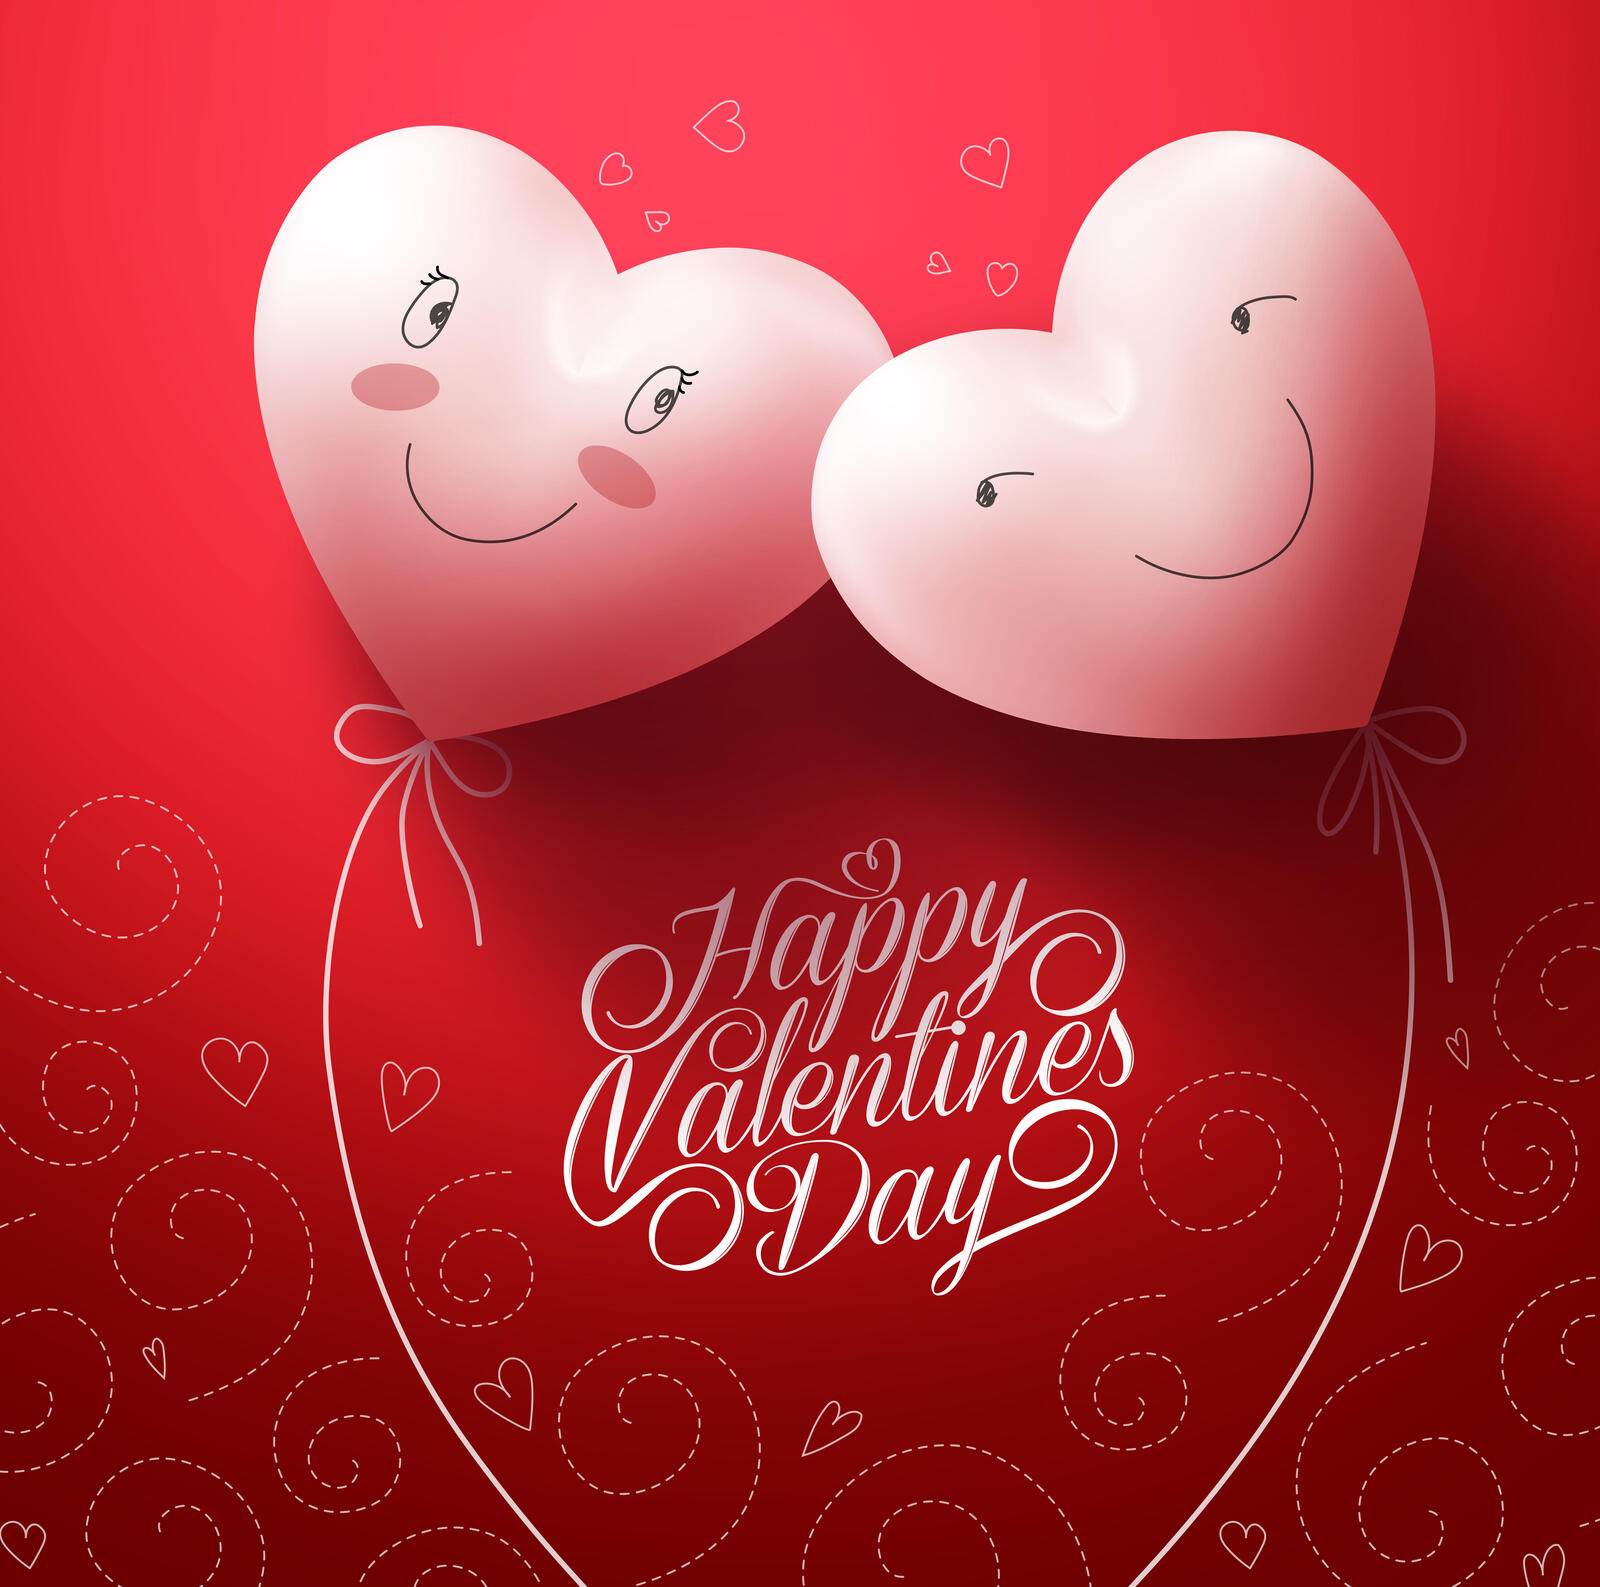 Wallpapers romantic hearts Valentine day a day of lovers on the desktop